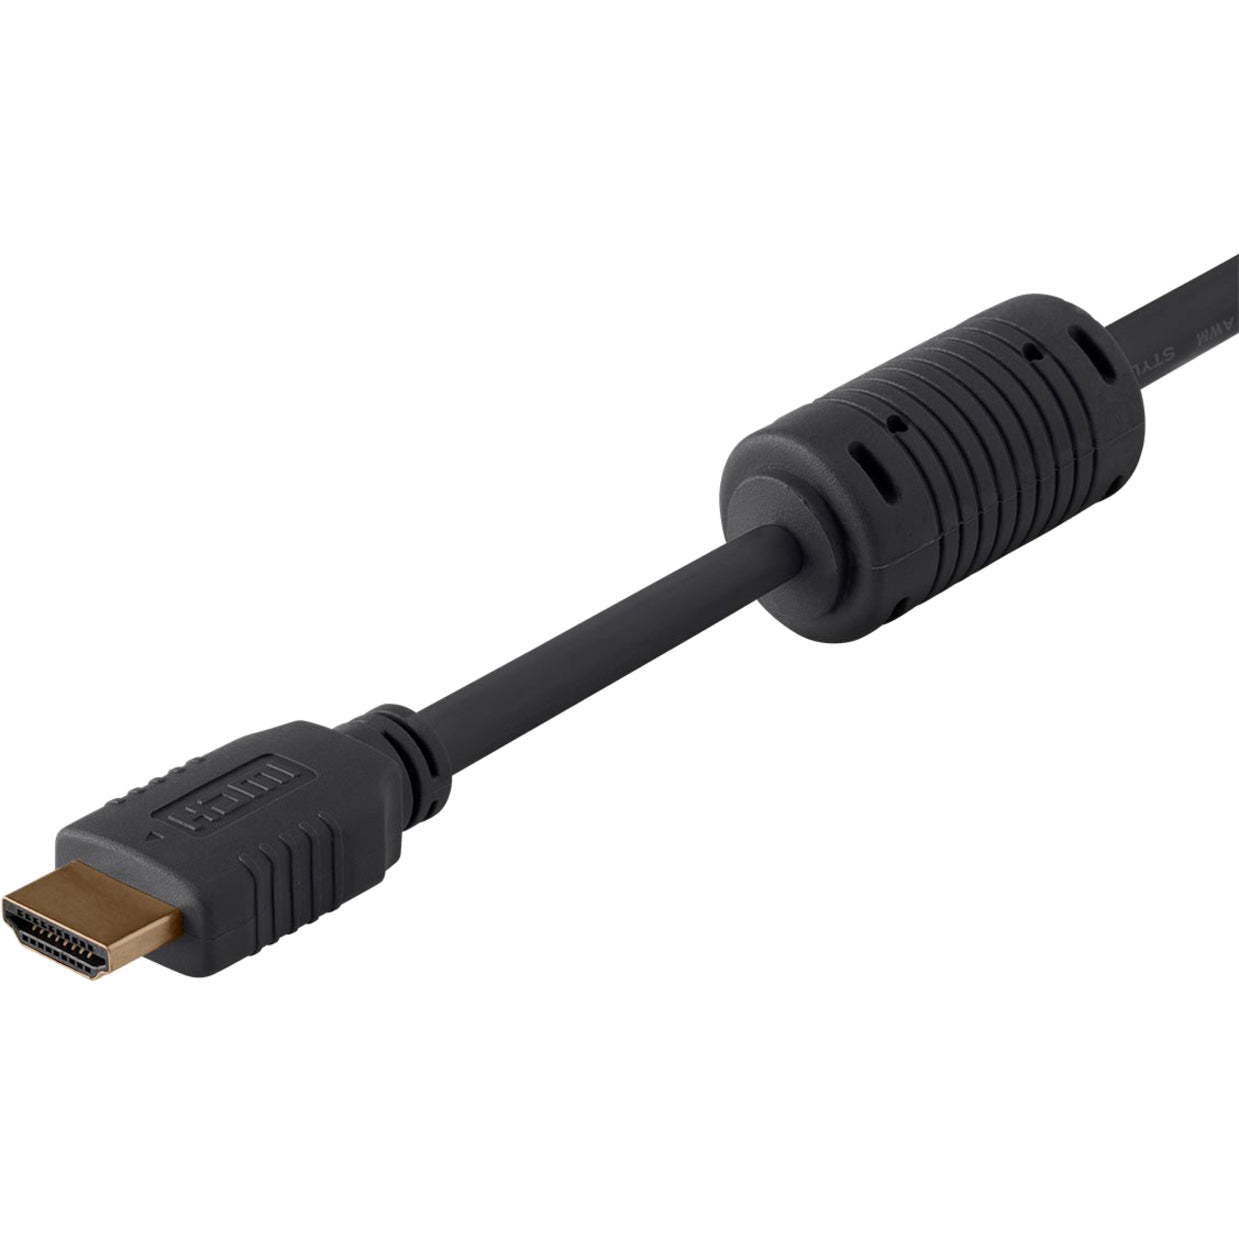 Monoprice 3992 Select Series High Speed HDMI Cable, 6ft Black, Audio Return Channel (ARC)